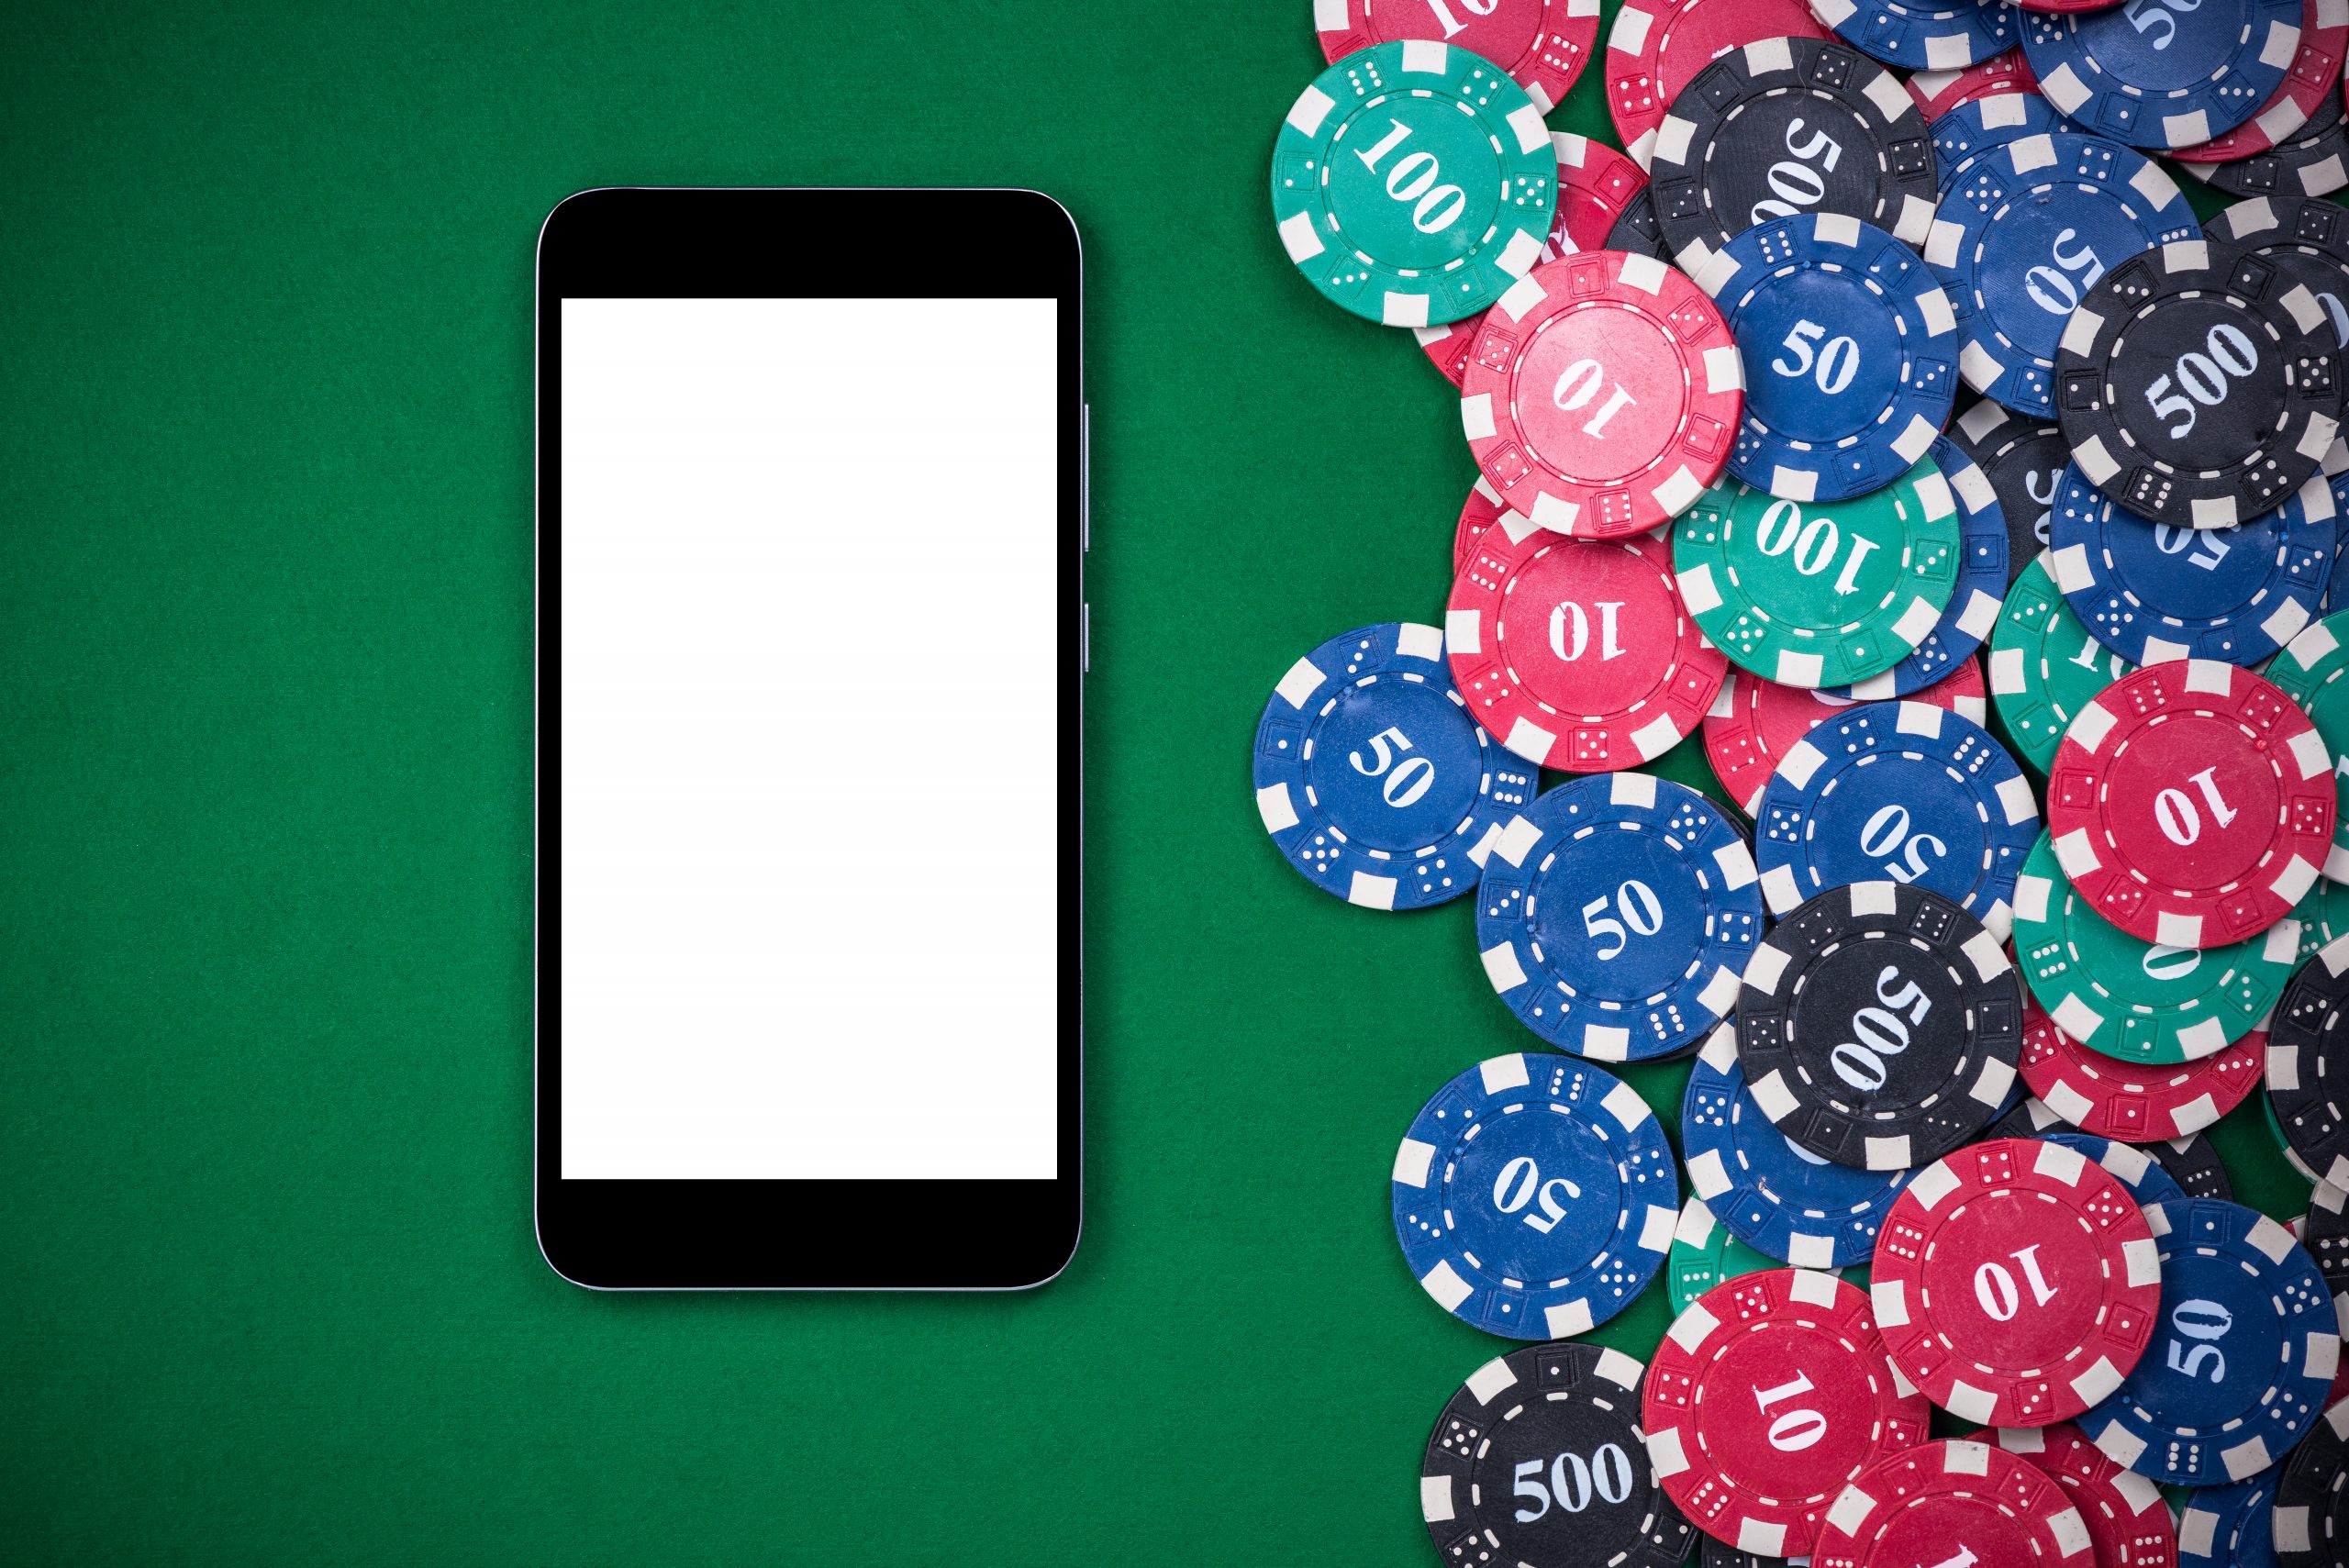 “A Guide to Mobile Online Casino Gaming”